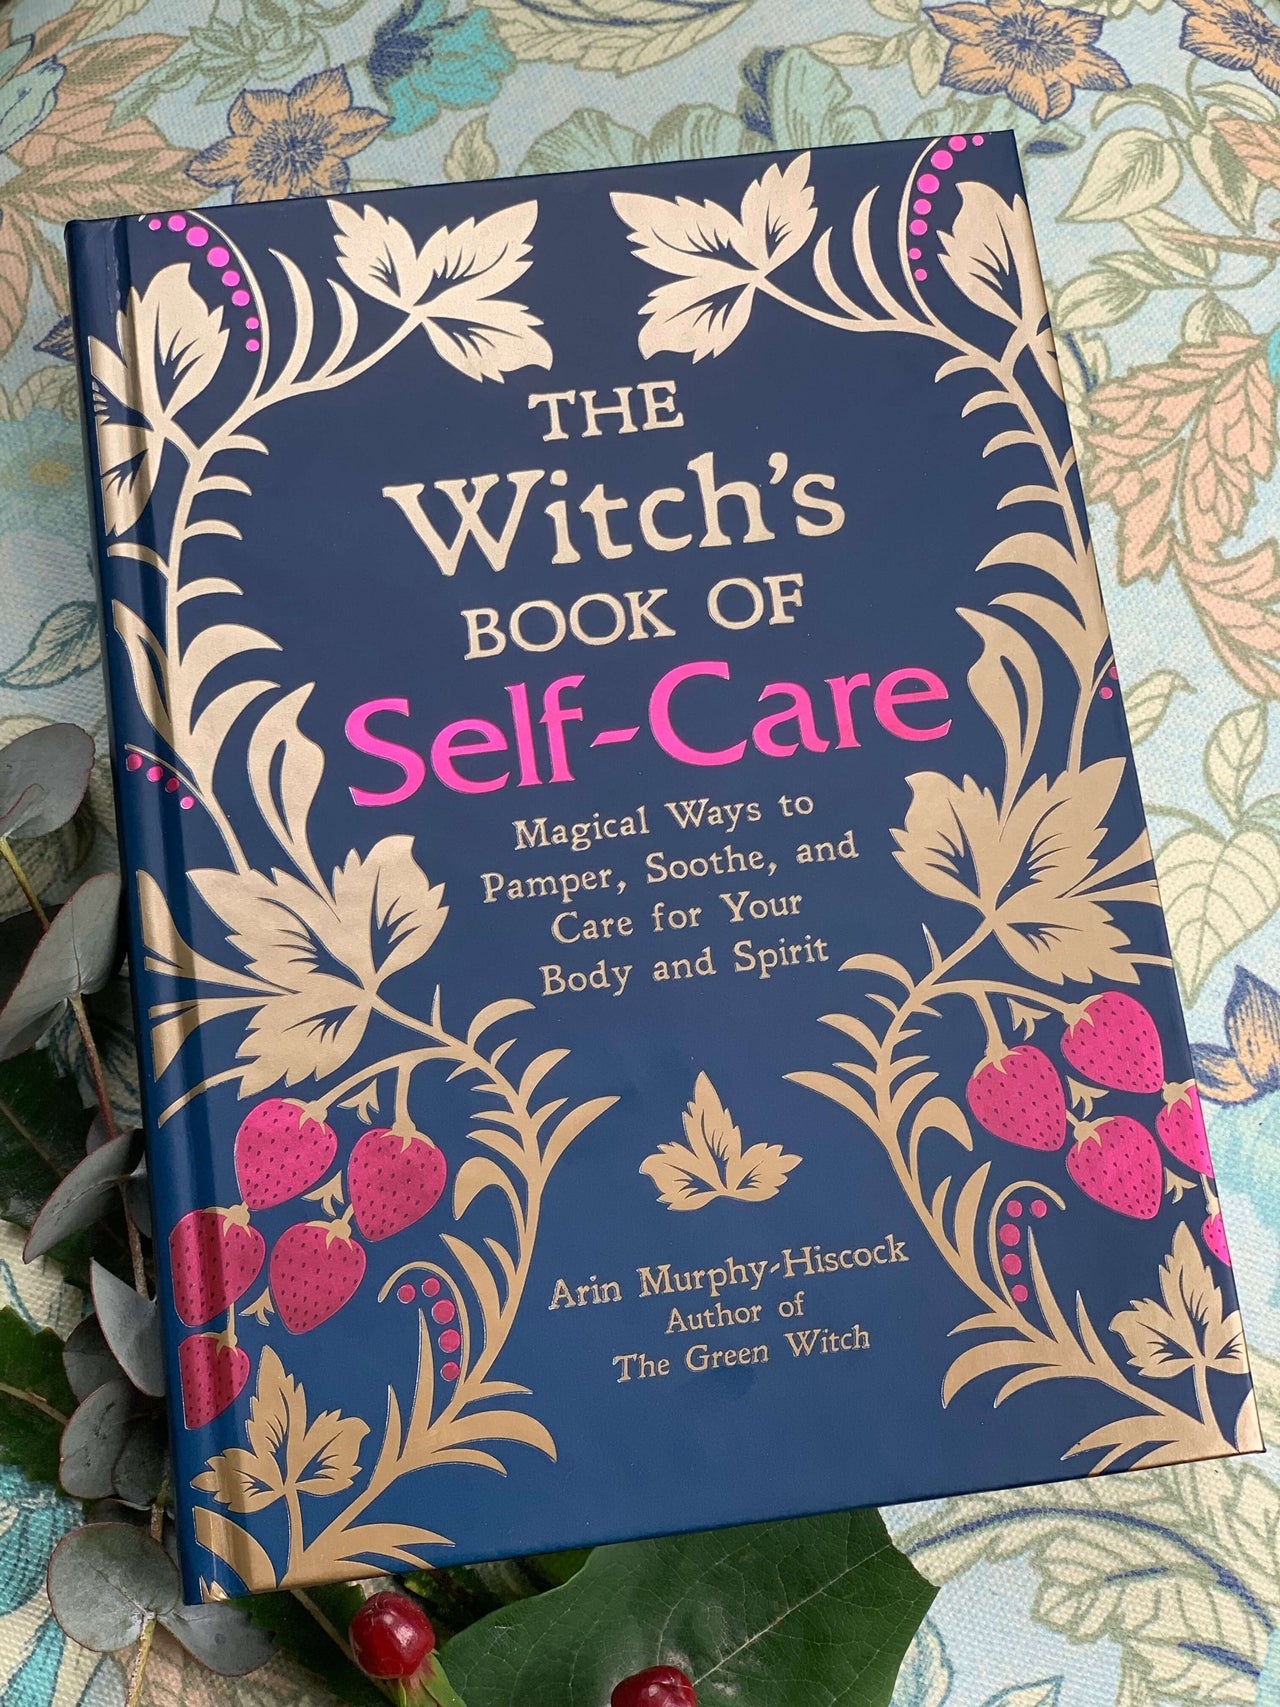 The Witch's Book of Self-Care - Haven Botanical